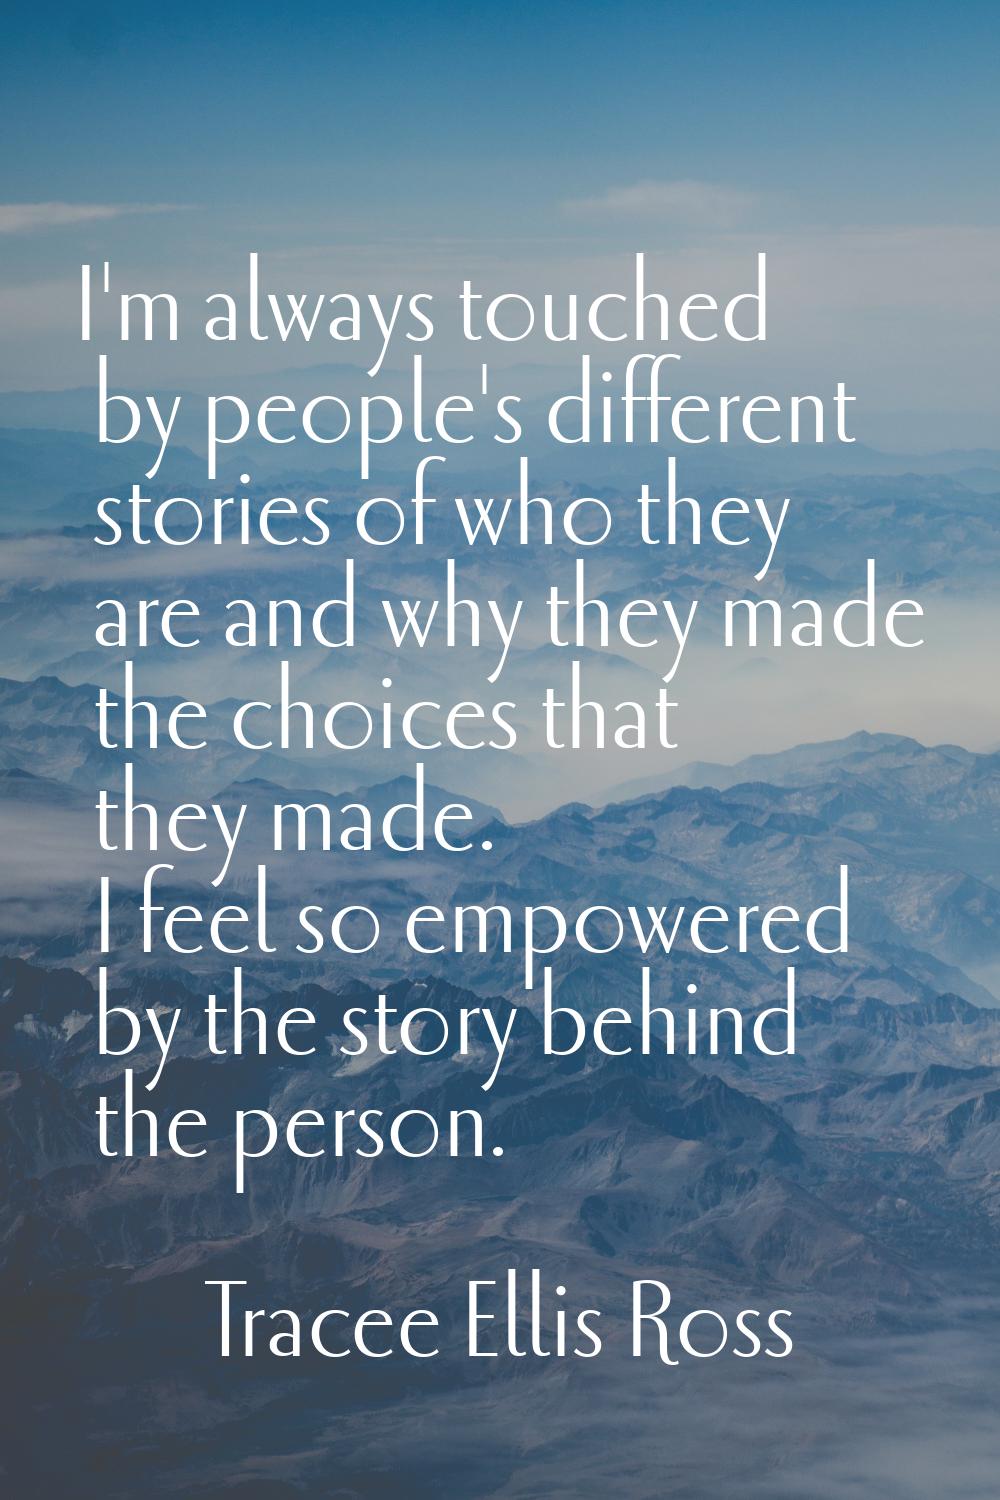 I'm always touched by people's different stories of who they are and why they made the choices that